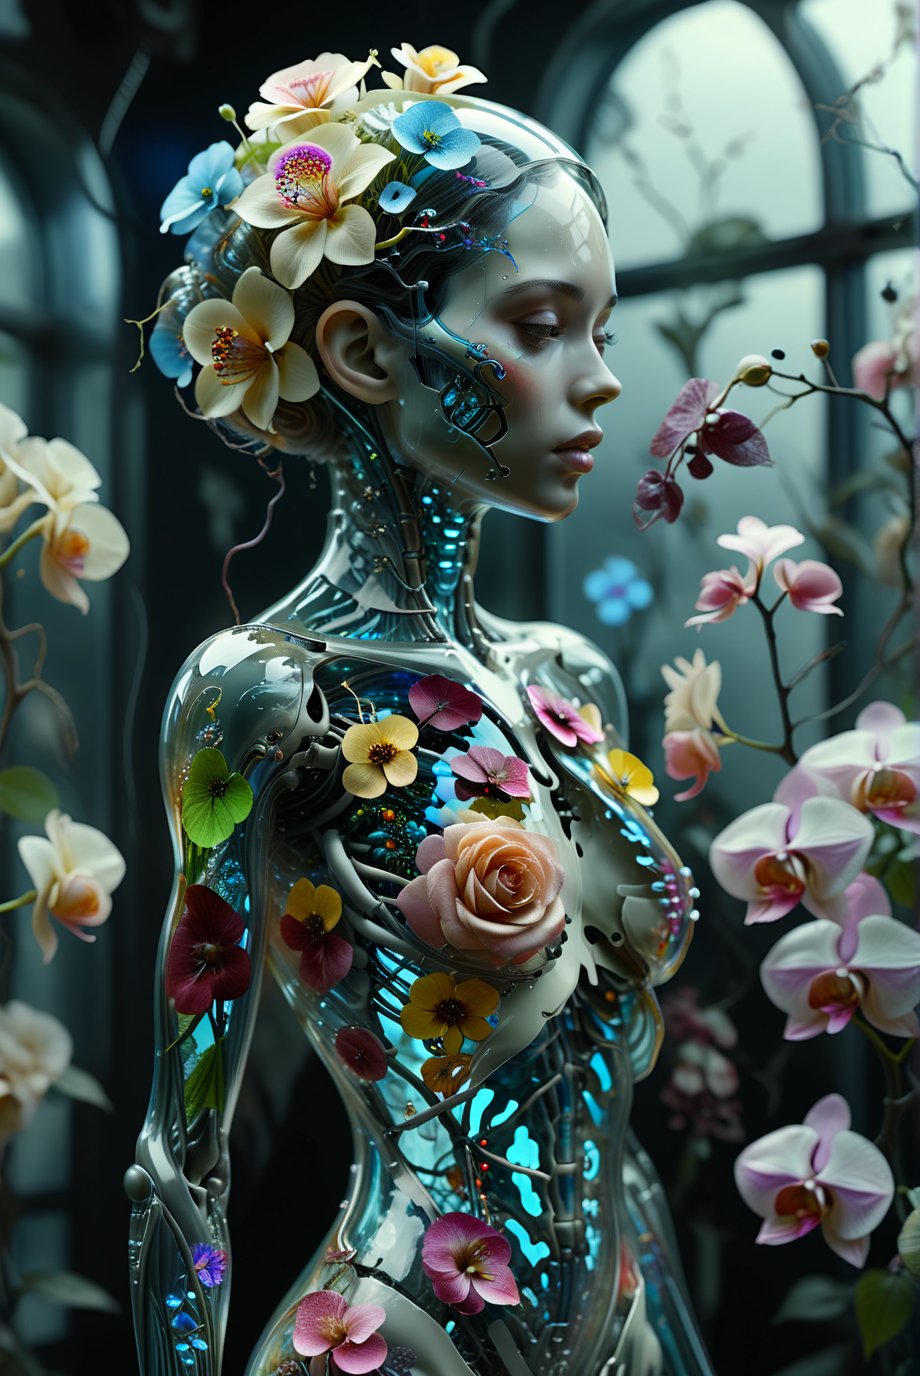 1girl,solo,"Transparent glass naked female cyborg. Skeleton and organs made of vibrant flowers. Mechanical joints visible. Heart of roses, lungs of hydrangeas, brain of orchids. Flowers spilling from slight cracks. Soft backlighting emphasizing transparency. Elegant pose. Simple futuristic background. Photorealistic style with high detail on glass and floral elements.",Clear Glass Skin,tranzp